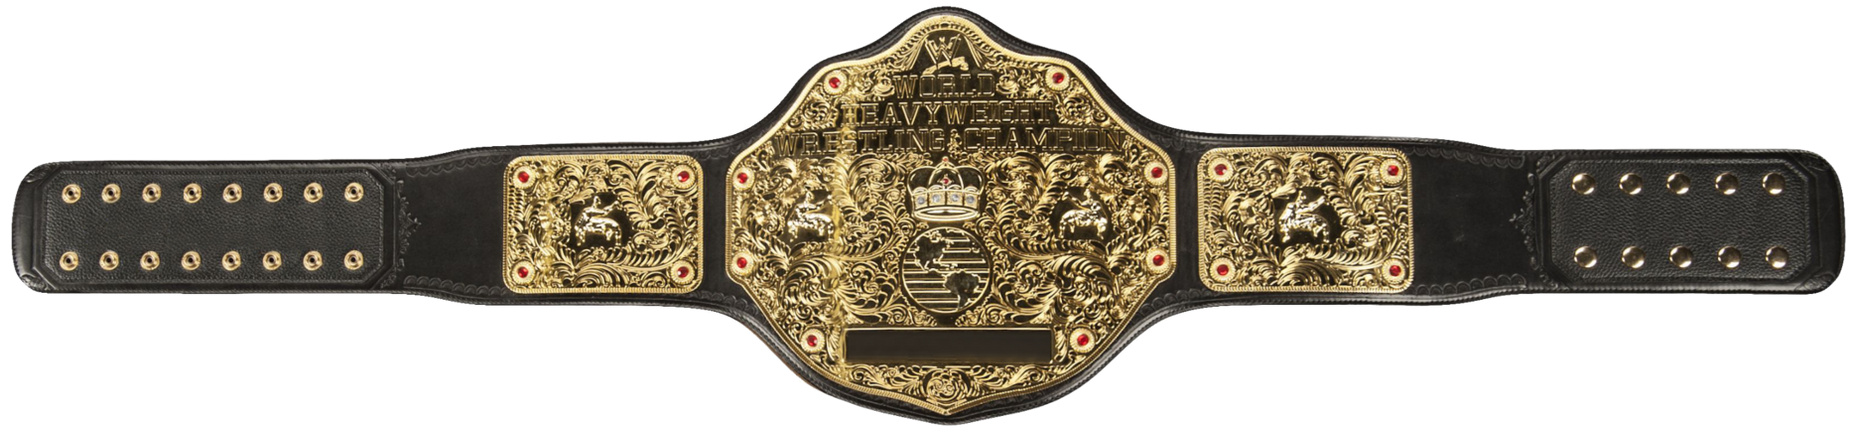 world_heavyweight_championship_by_nibble